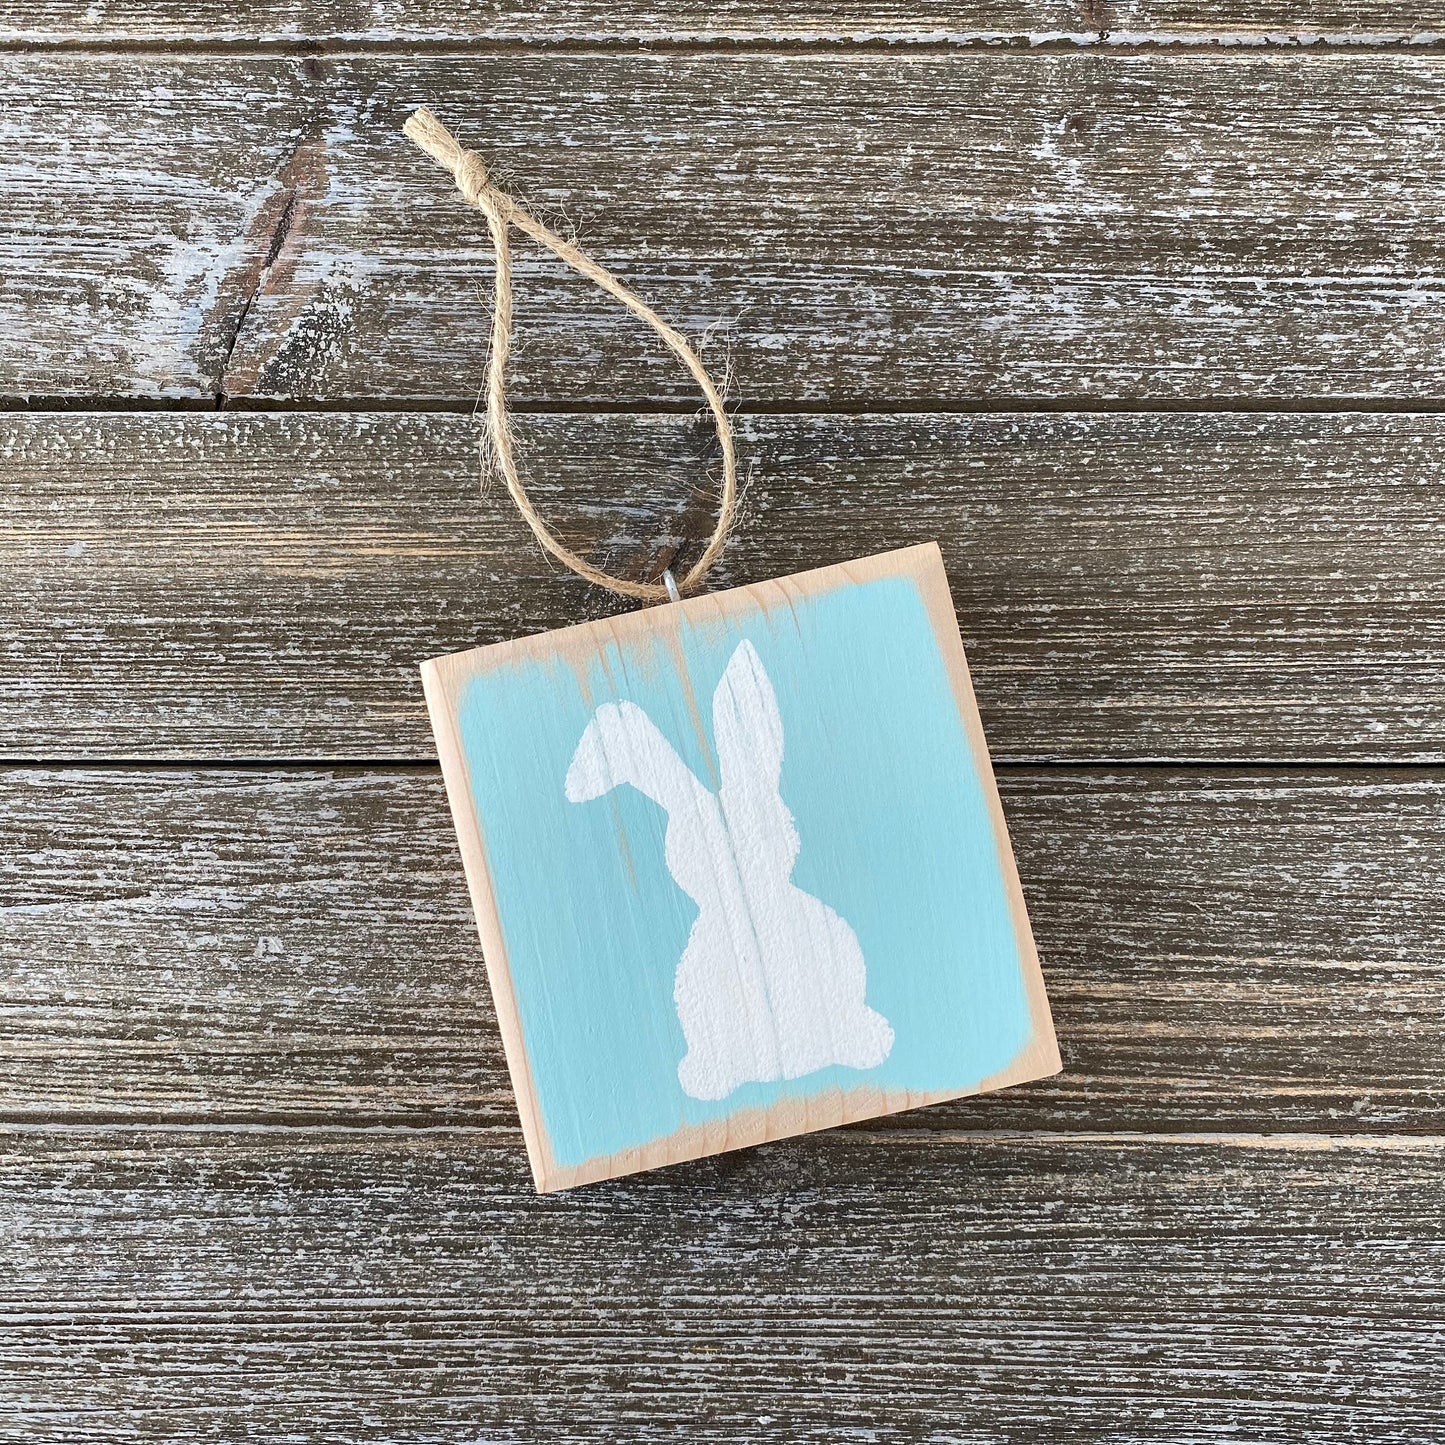 Easter Decor - Spring Easter Ornament with White Bunny